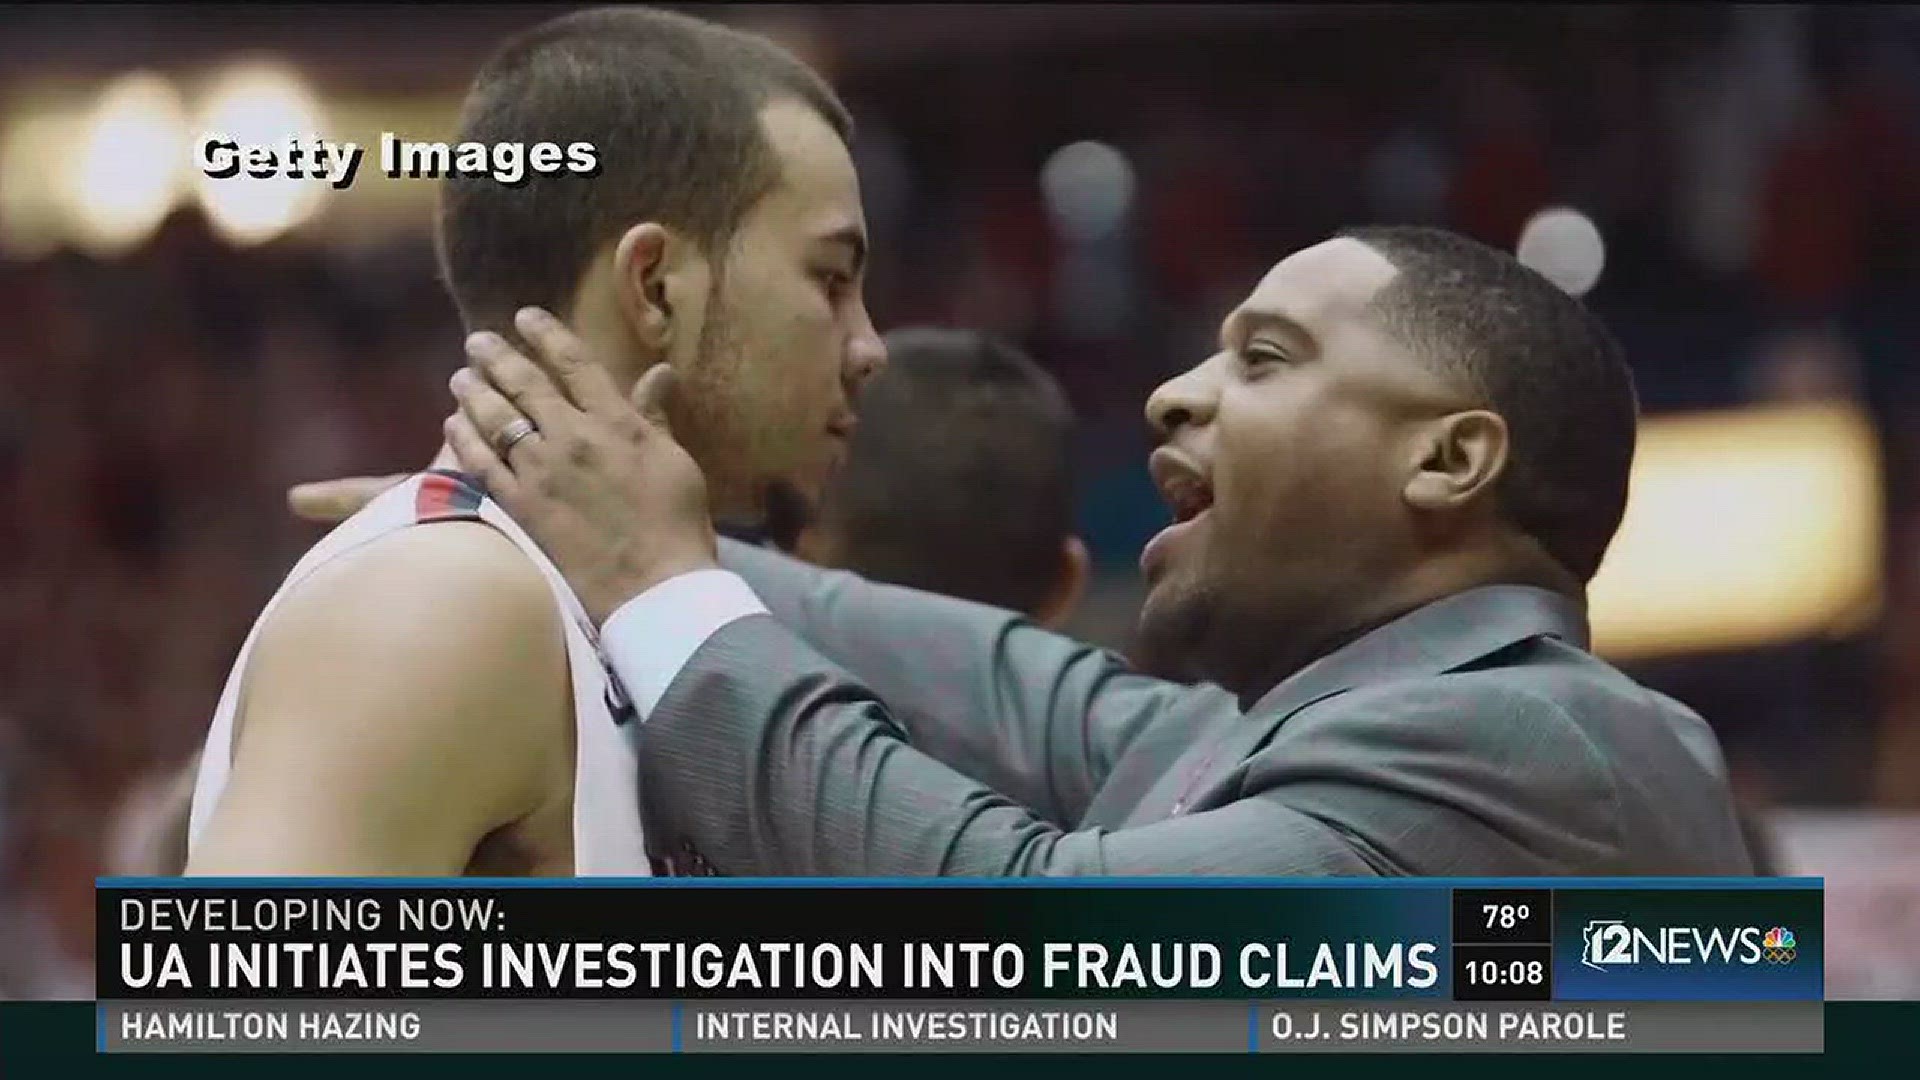 The U of A will conduct an internal investigation and initiate the dismissal of an assistant basketball coach in the wake of fraud and corruption charges from the FBI.